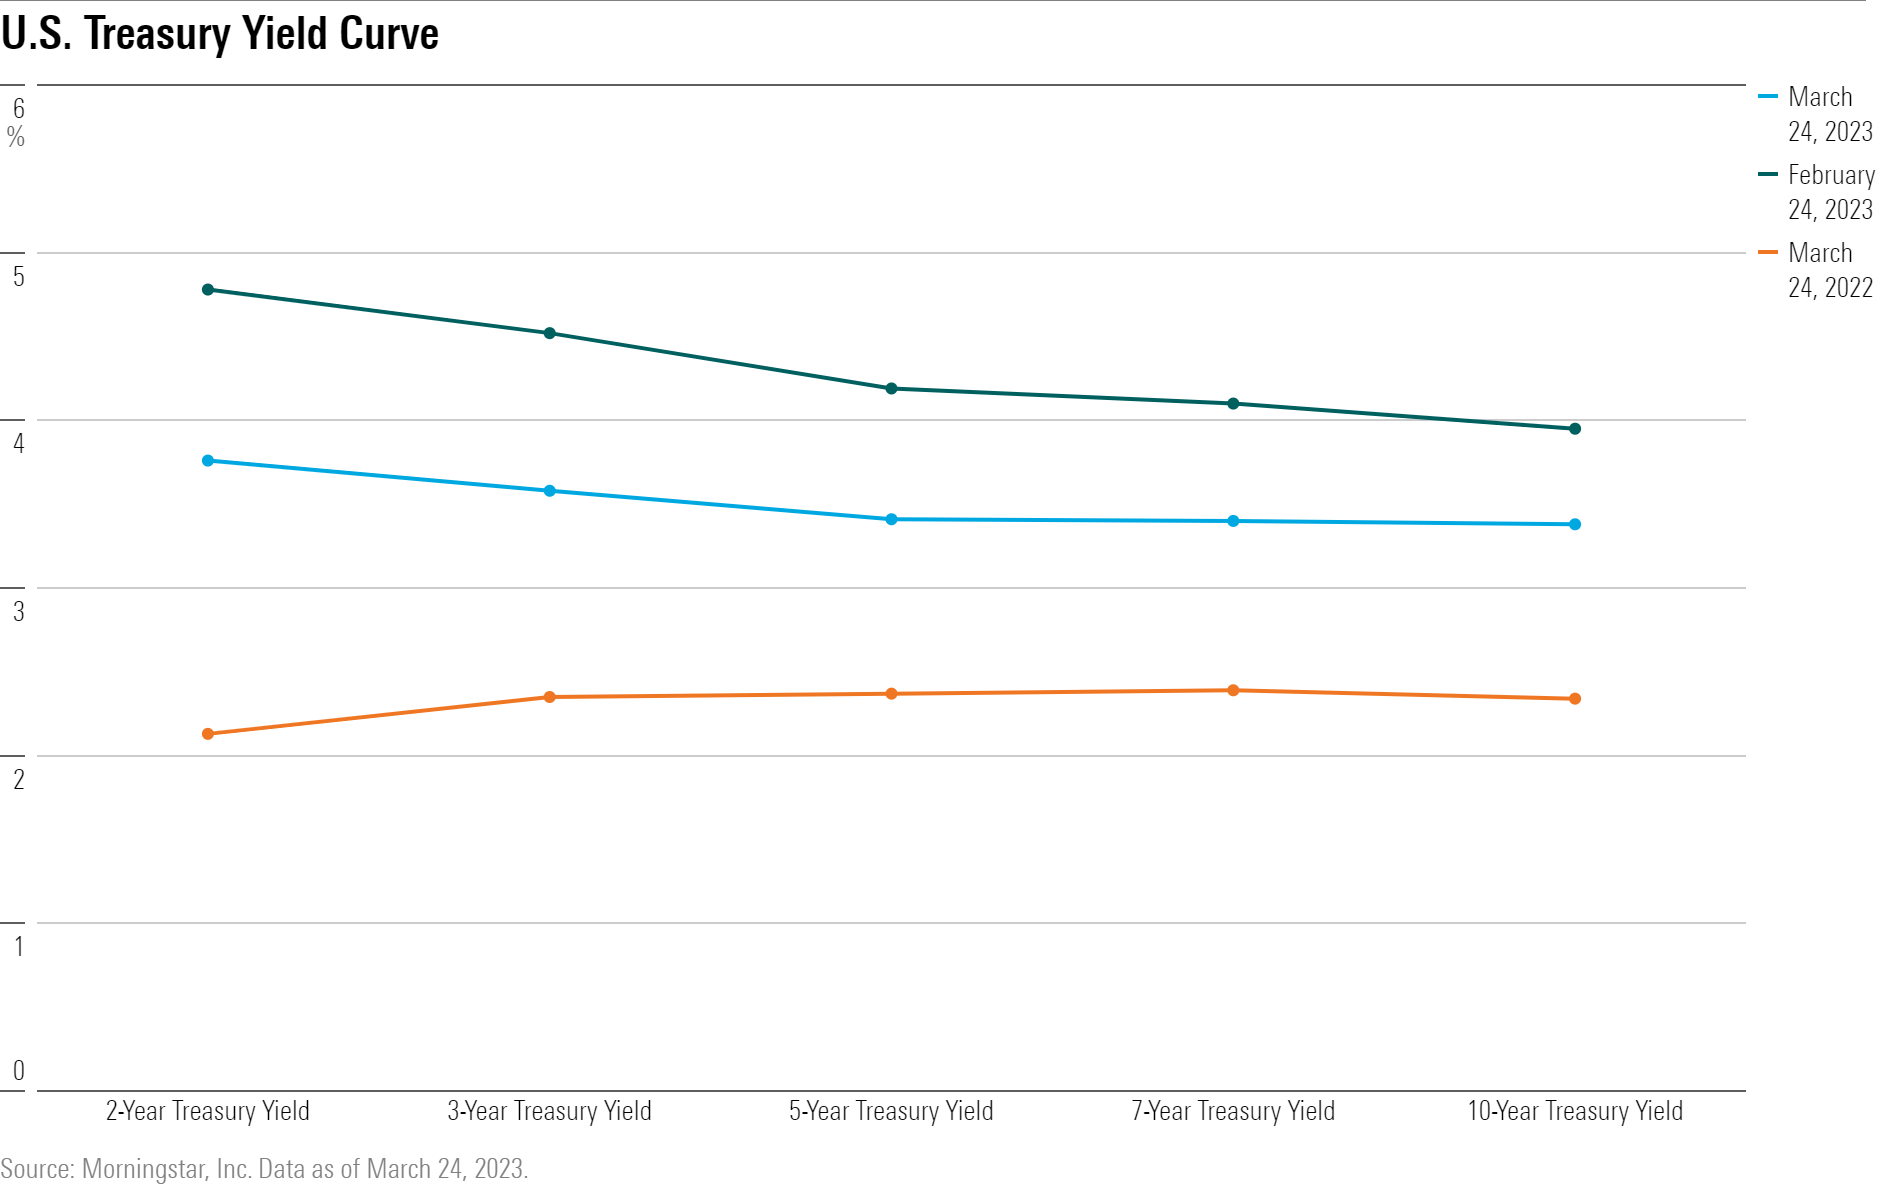 A line chart showing the yield curves for U.S Treasuries.